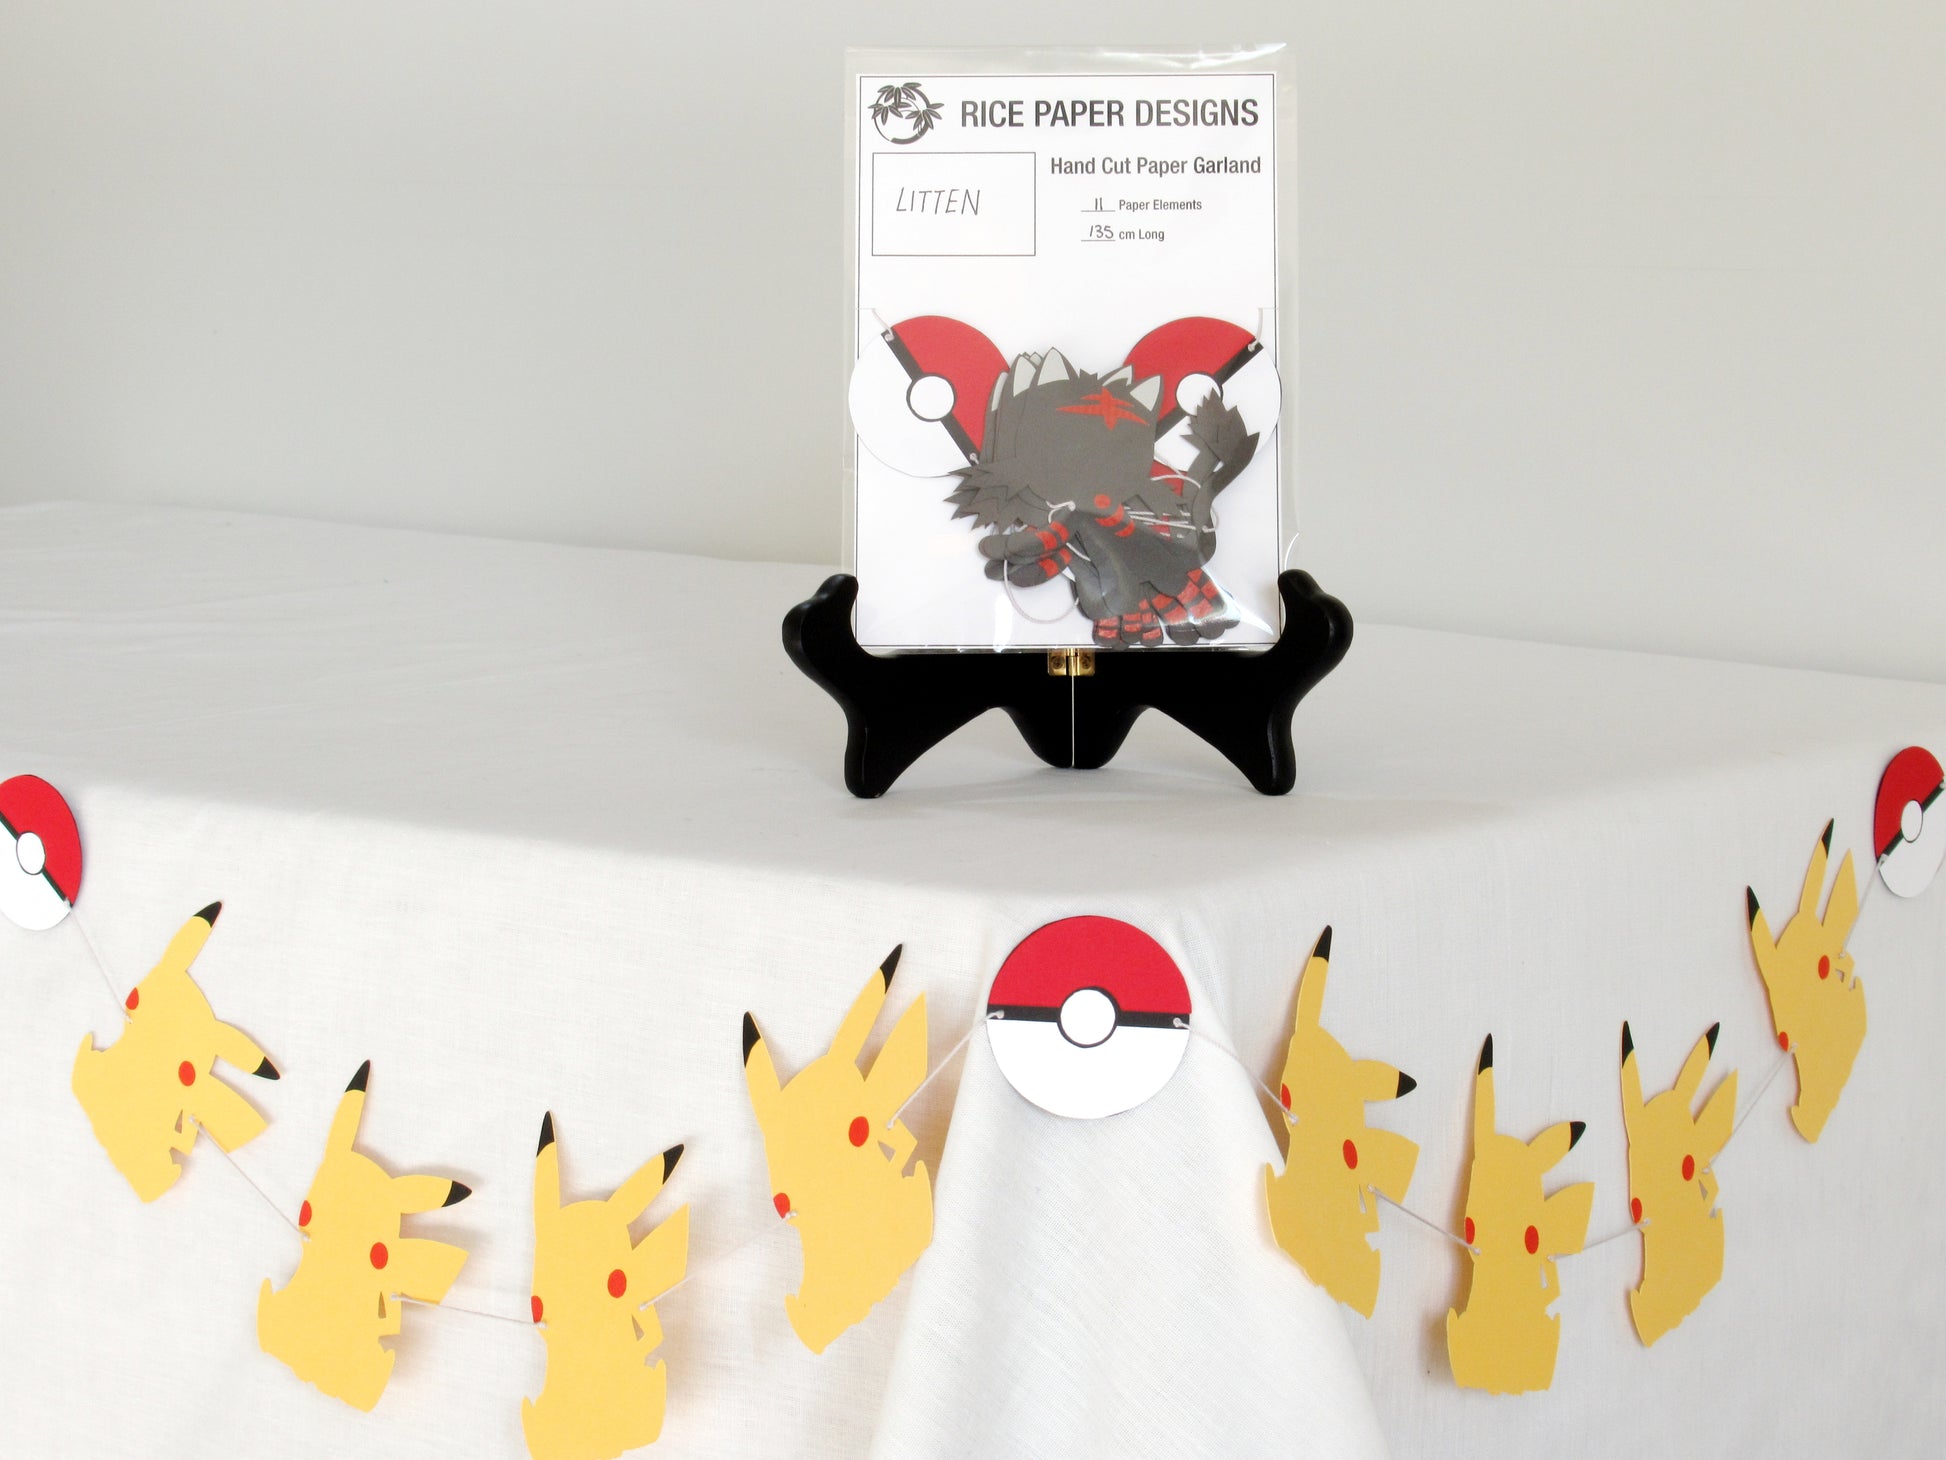 A garland with a series of paper littens and pokeballs arranged in neat bundle inside a clear bag. There is a paper behind them showing the Rice Paper Designs logo, and information about the garland. The bag is on a table, and below it is a sample garland with pikachu hung up.